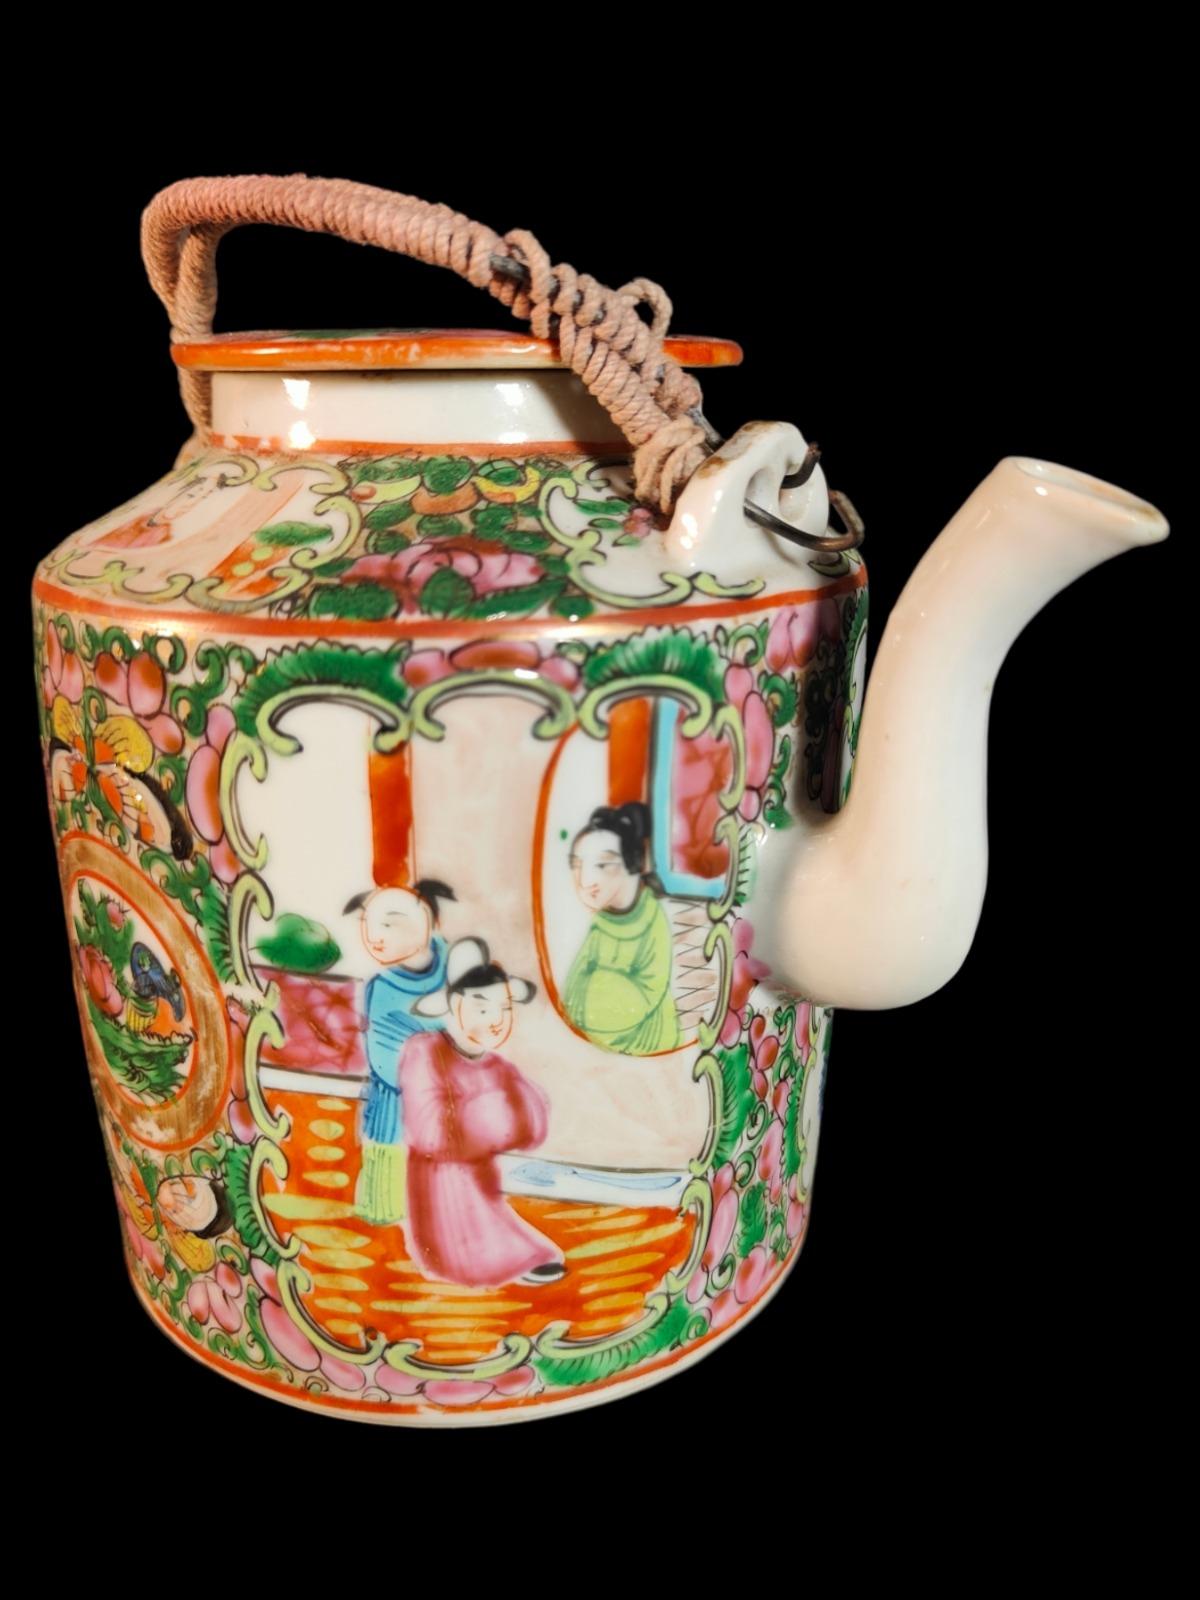 Hand-Crafted 19th Century Chinese Teap For Sale